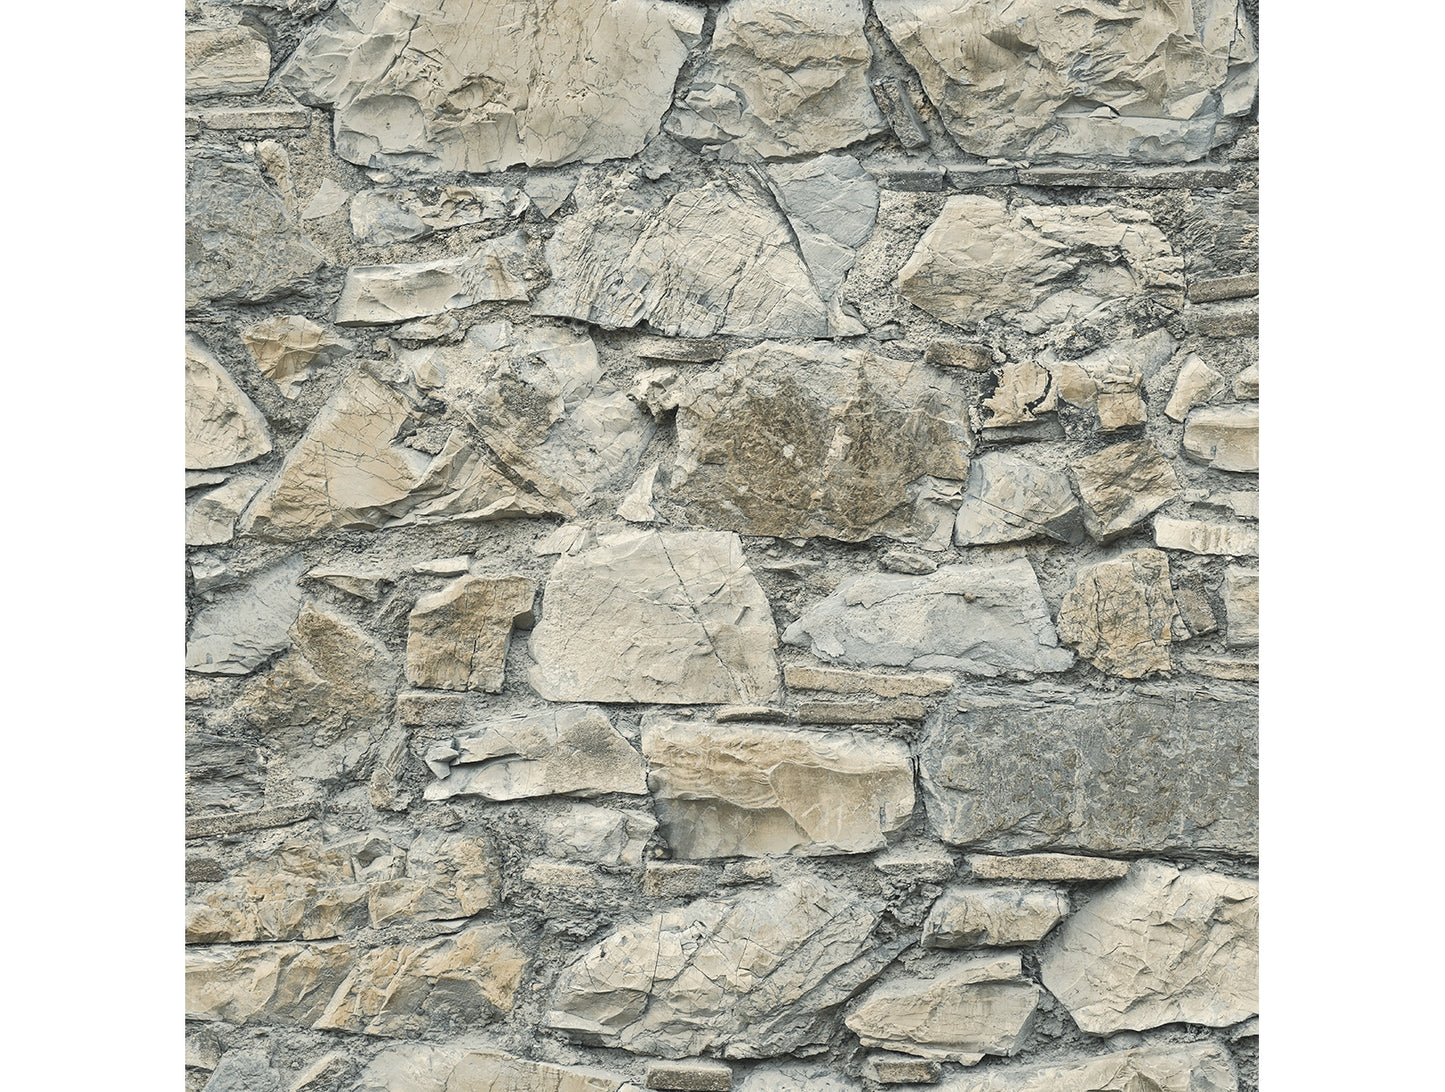 Rough Stacked Rock Wall